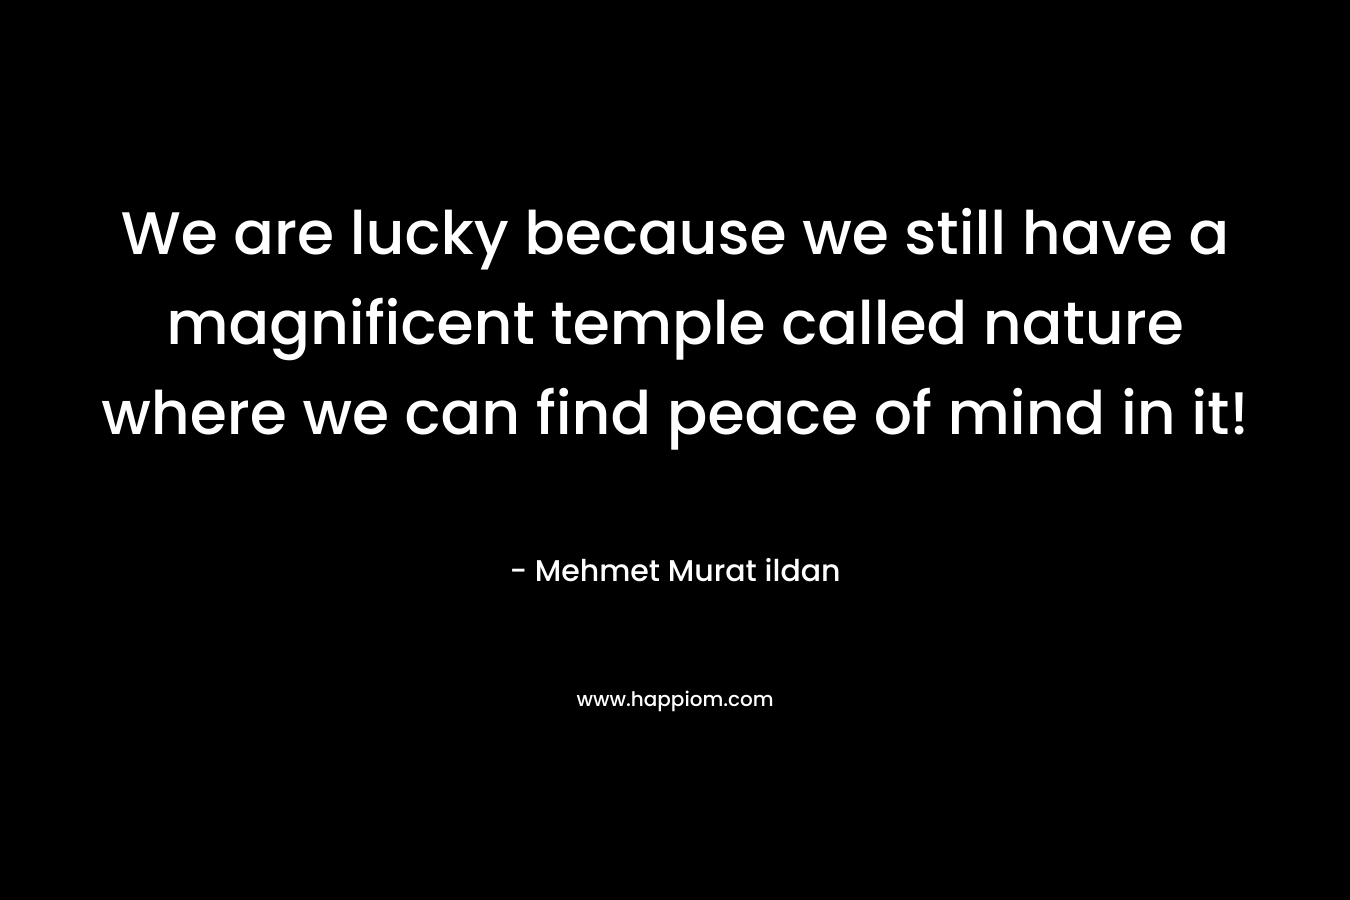 We are lucky because we still have a magnificent temple called nature where we can find peace of mind in it!